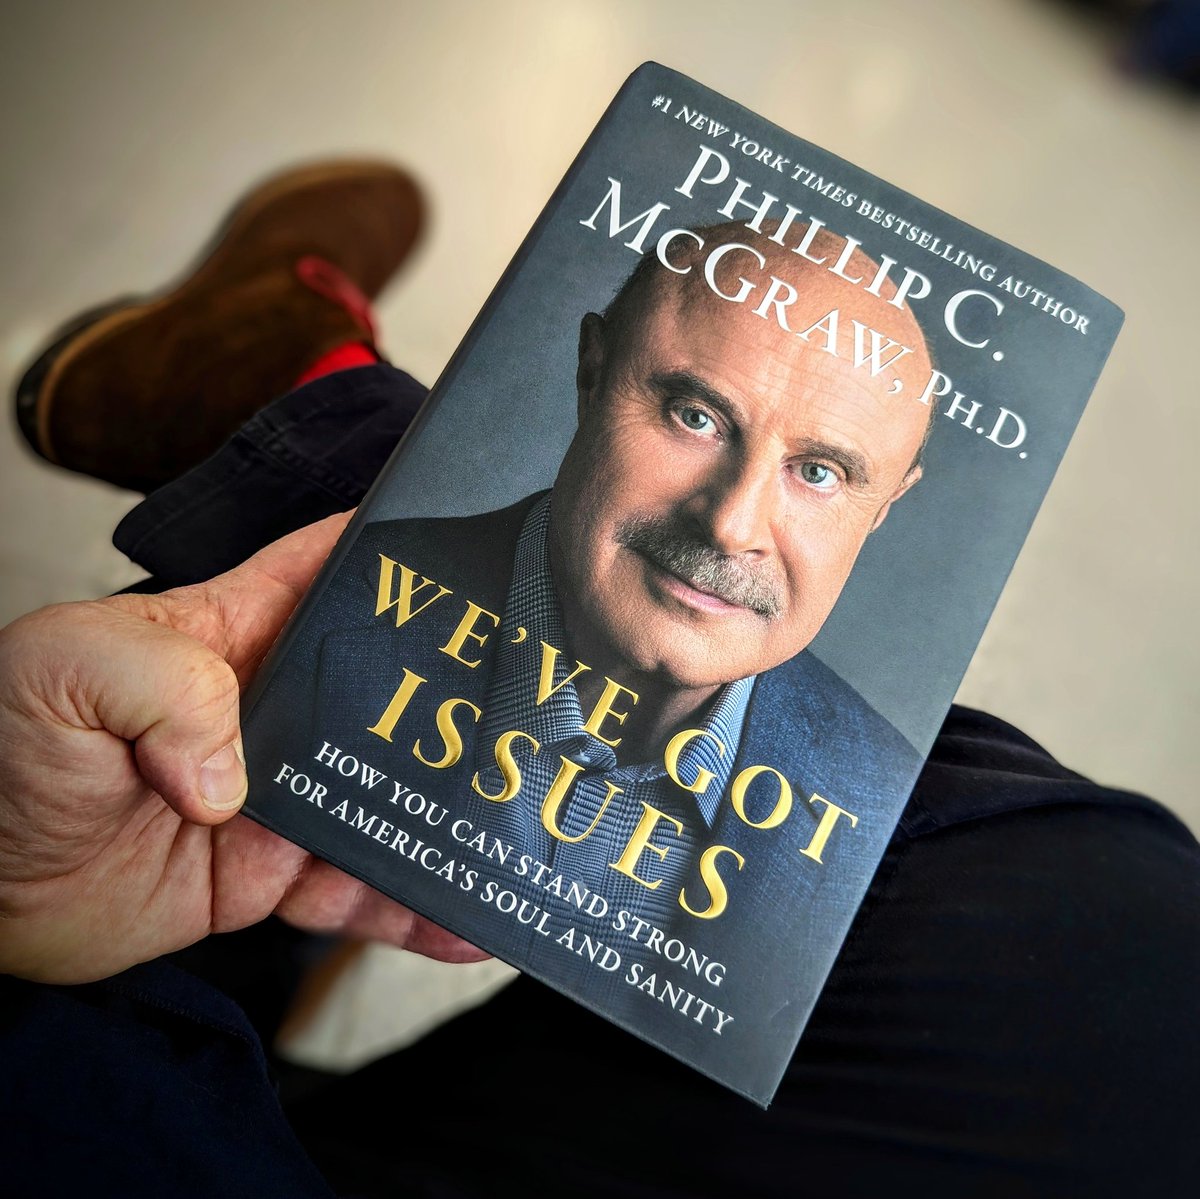 Just picked up my friend's book at the airport for the journey home! Looking forward to the read, @DrPhil